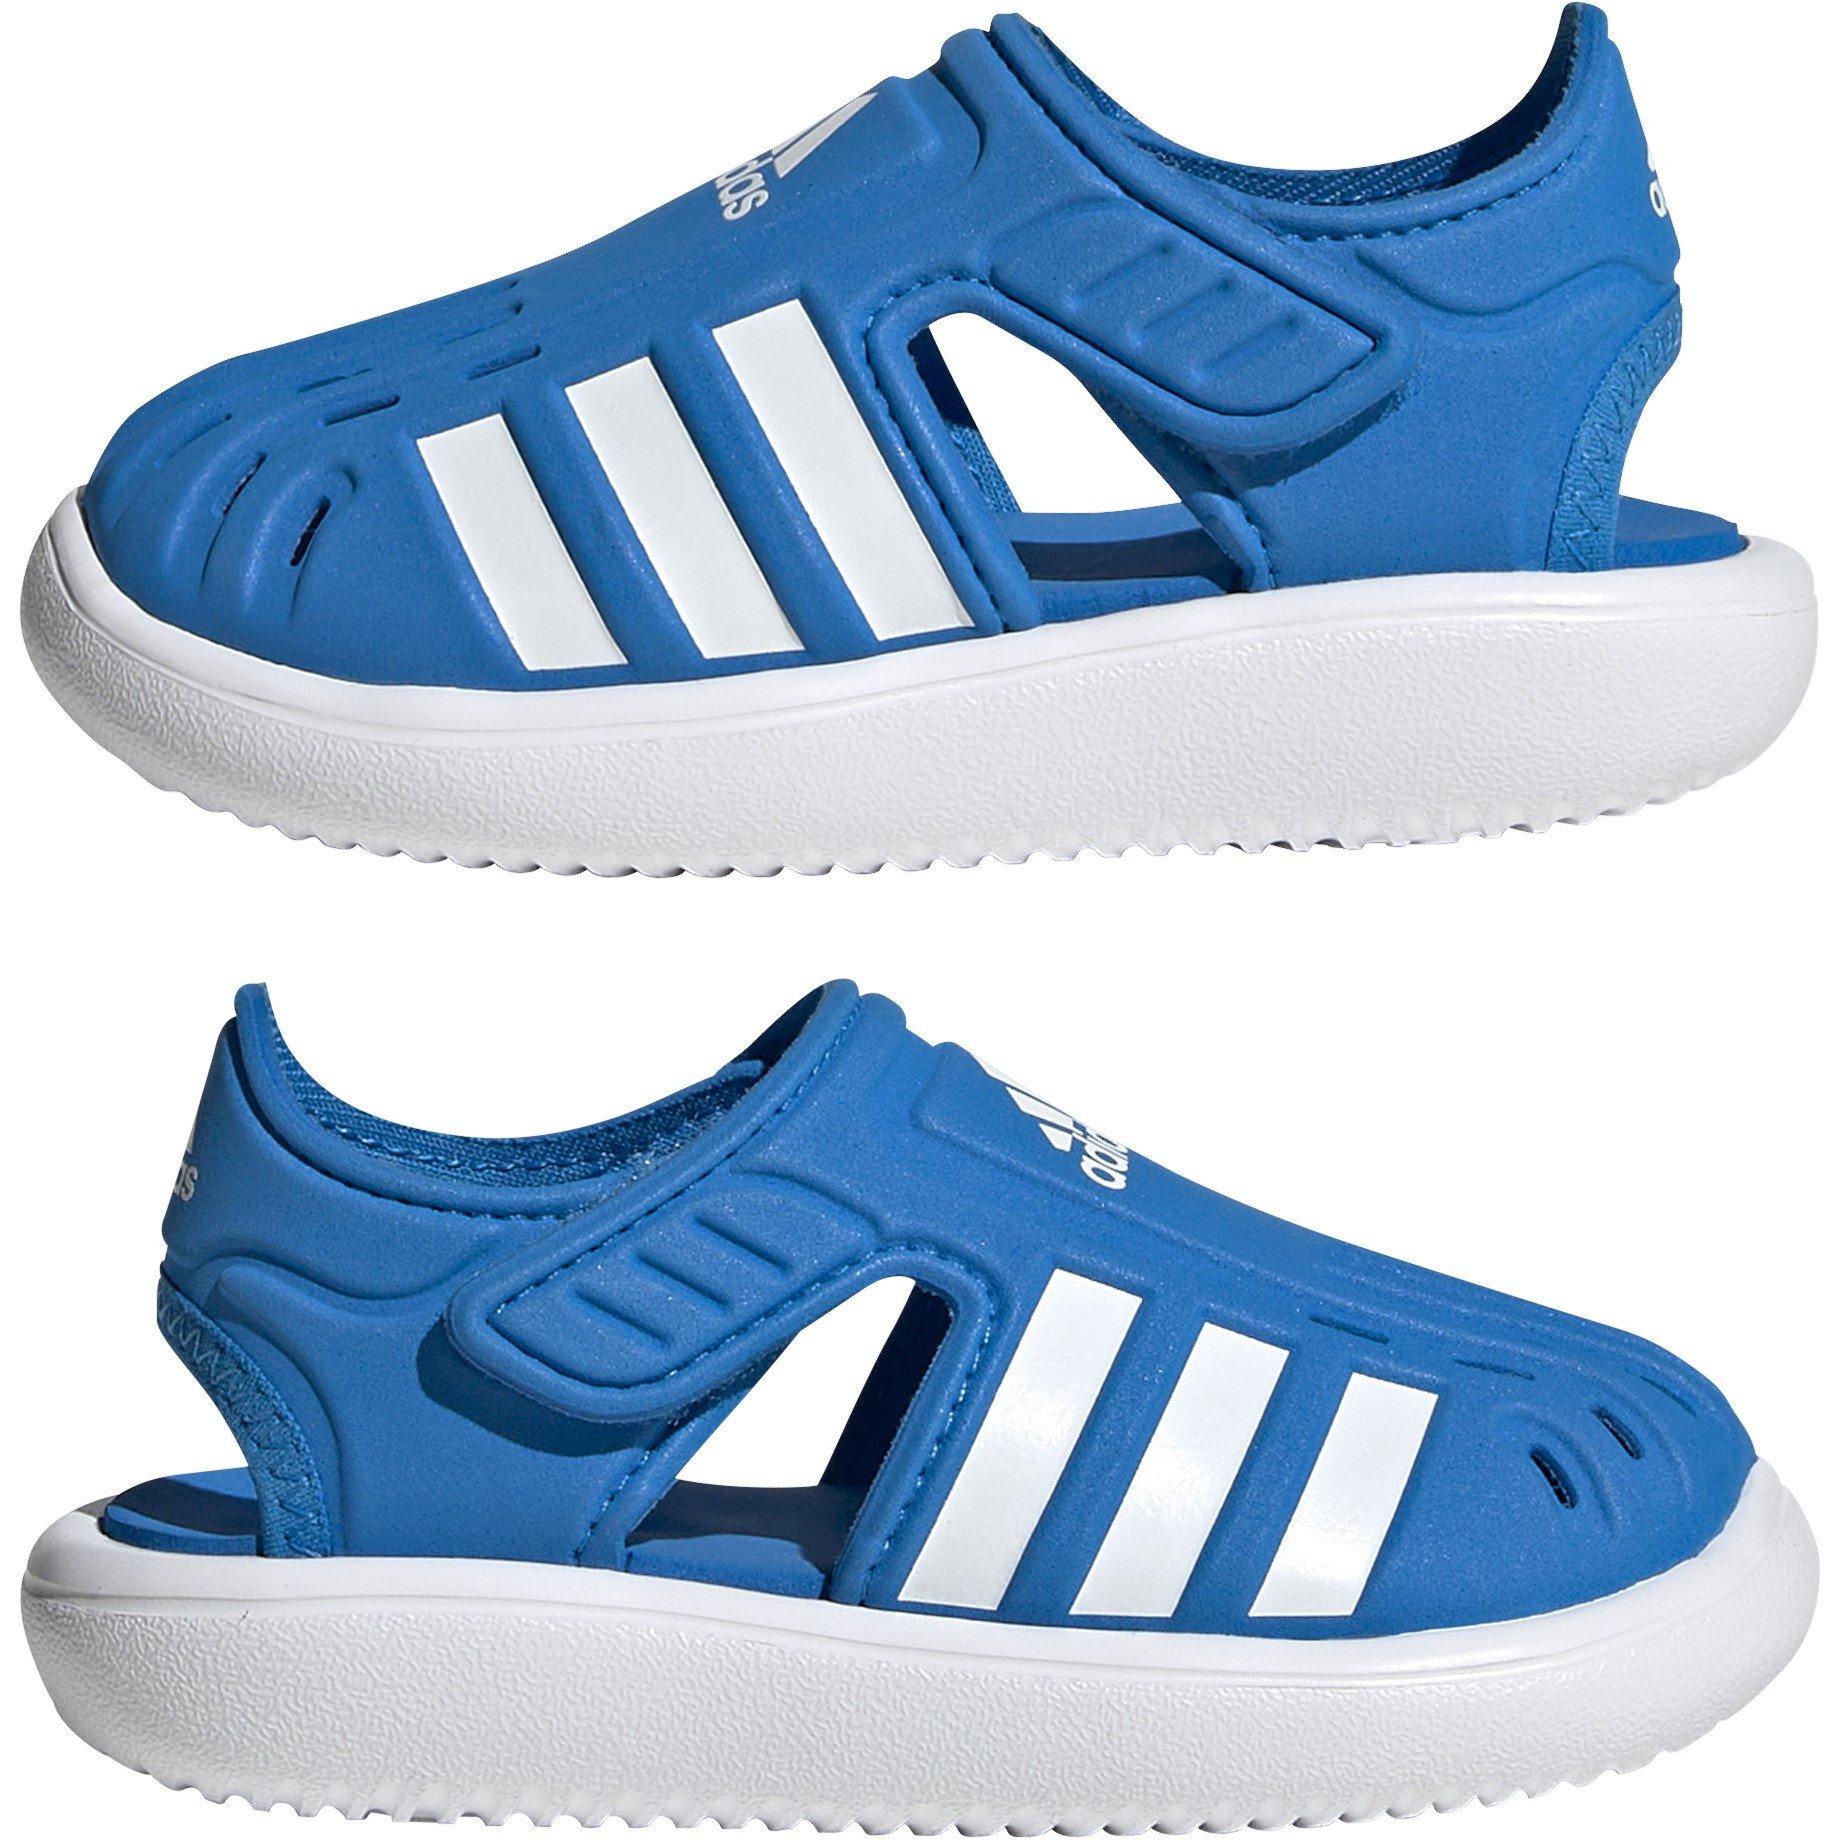 adidas | Closed Toe Summer Sandals Direct | Sandals Infants Water Sports | Sports MY